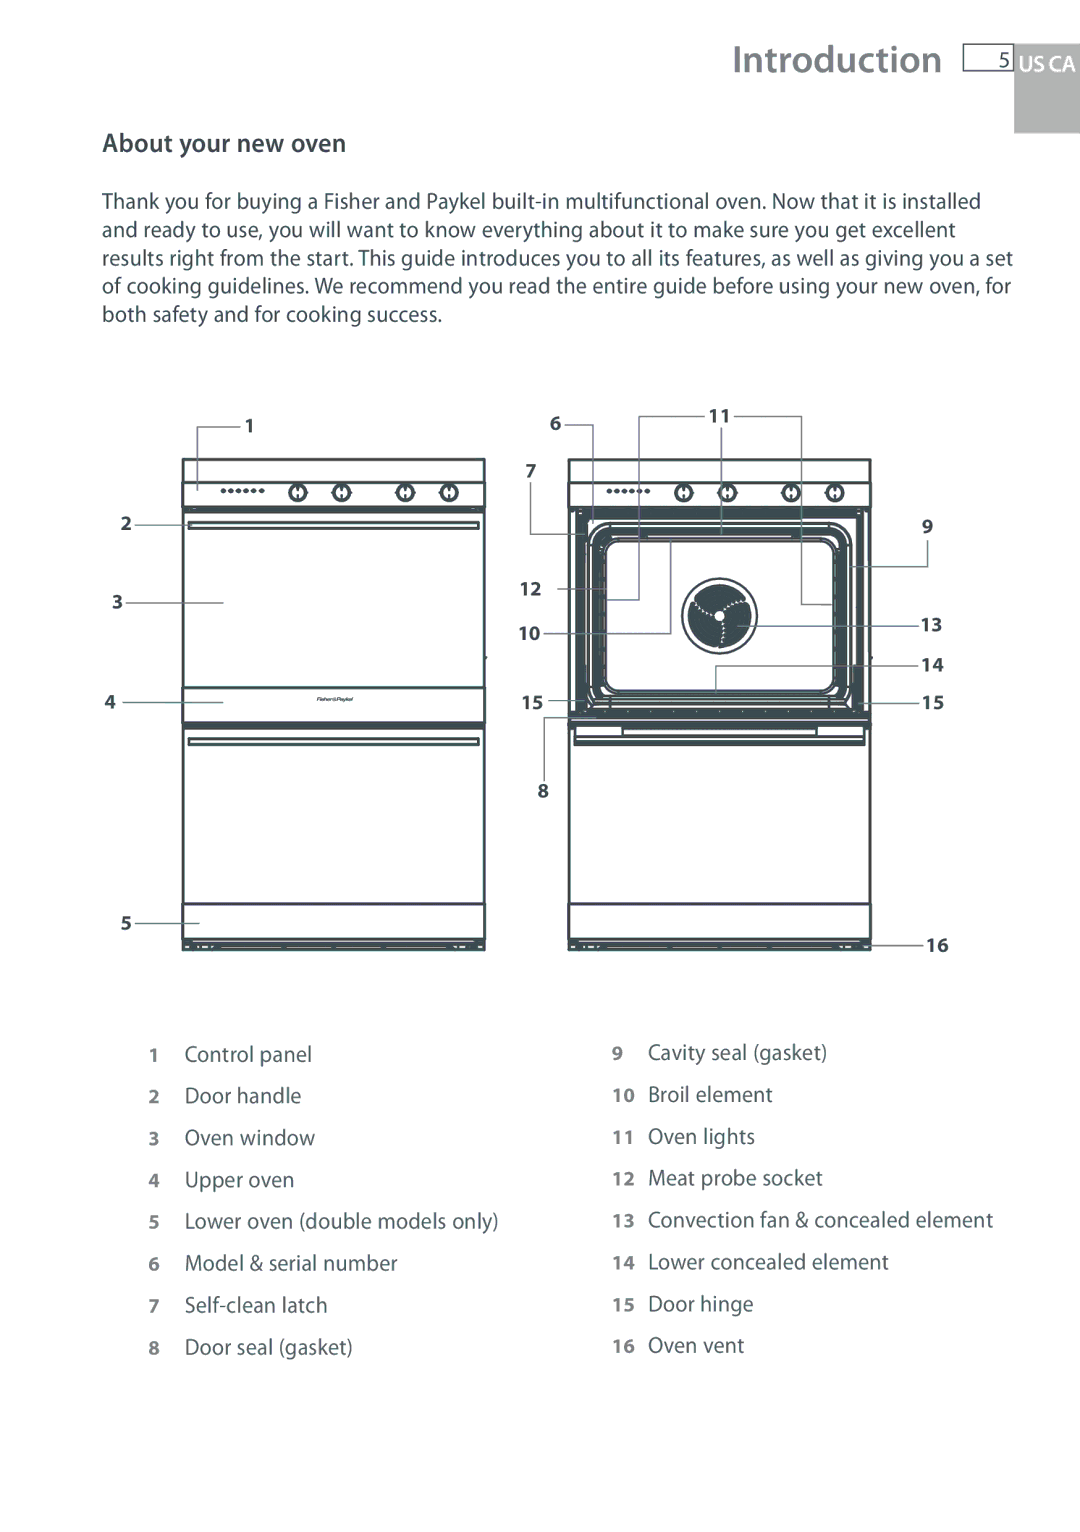 Fisher & Paykel OB30 manual Introduction, About your new oven 